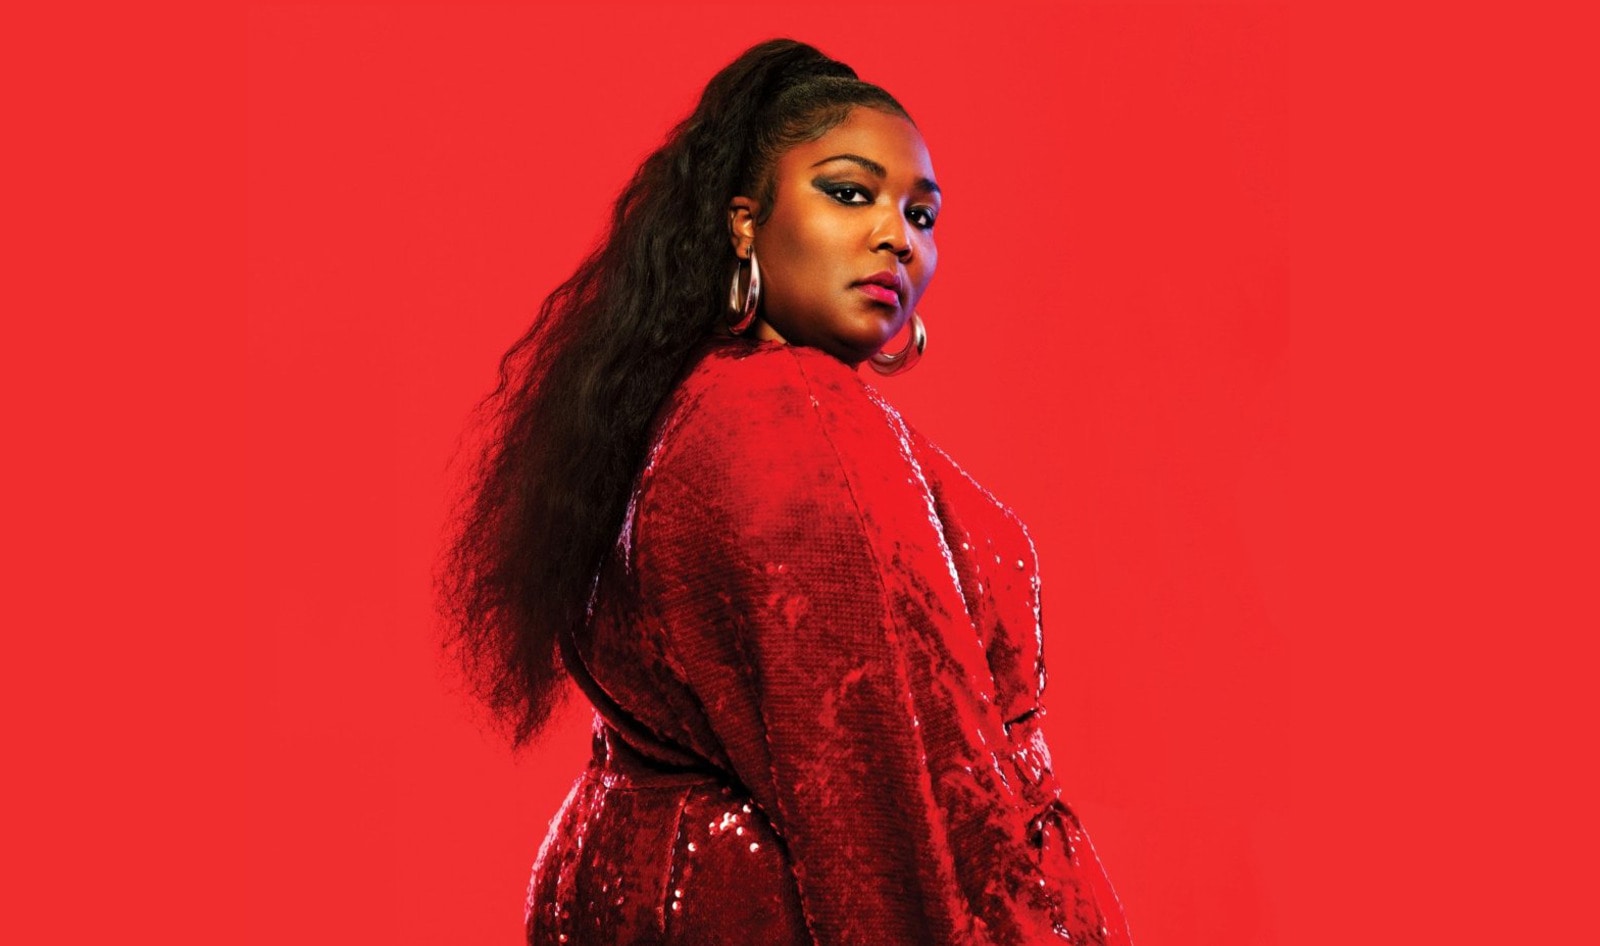 Lizzo Shares What a “Fat Vegan” Eats in a Day, Demands Justice for Breonna Taylor